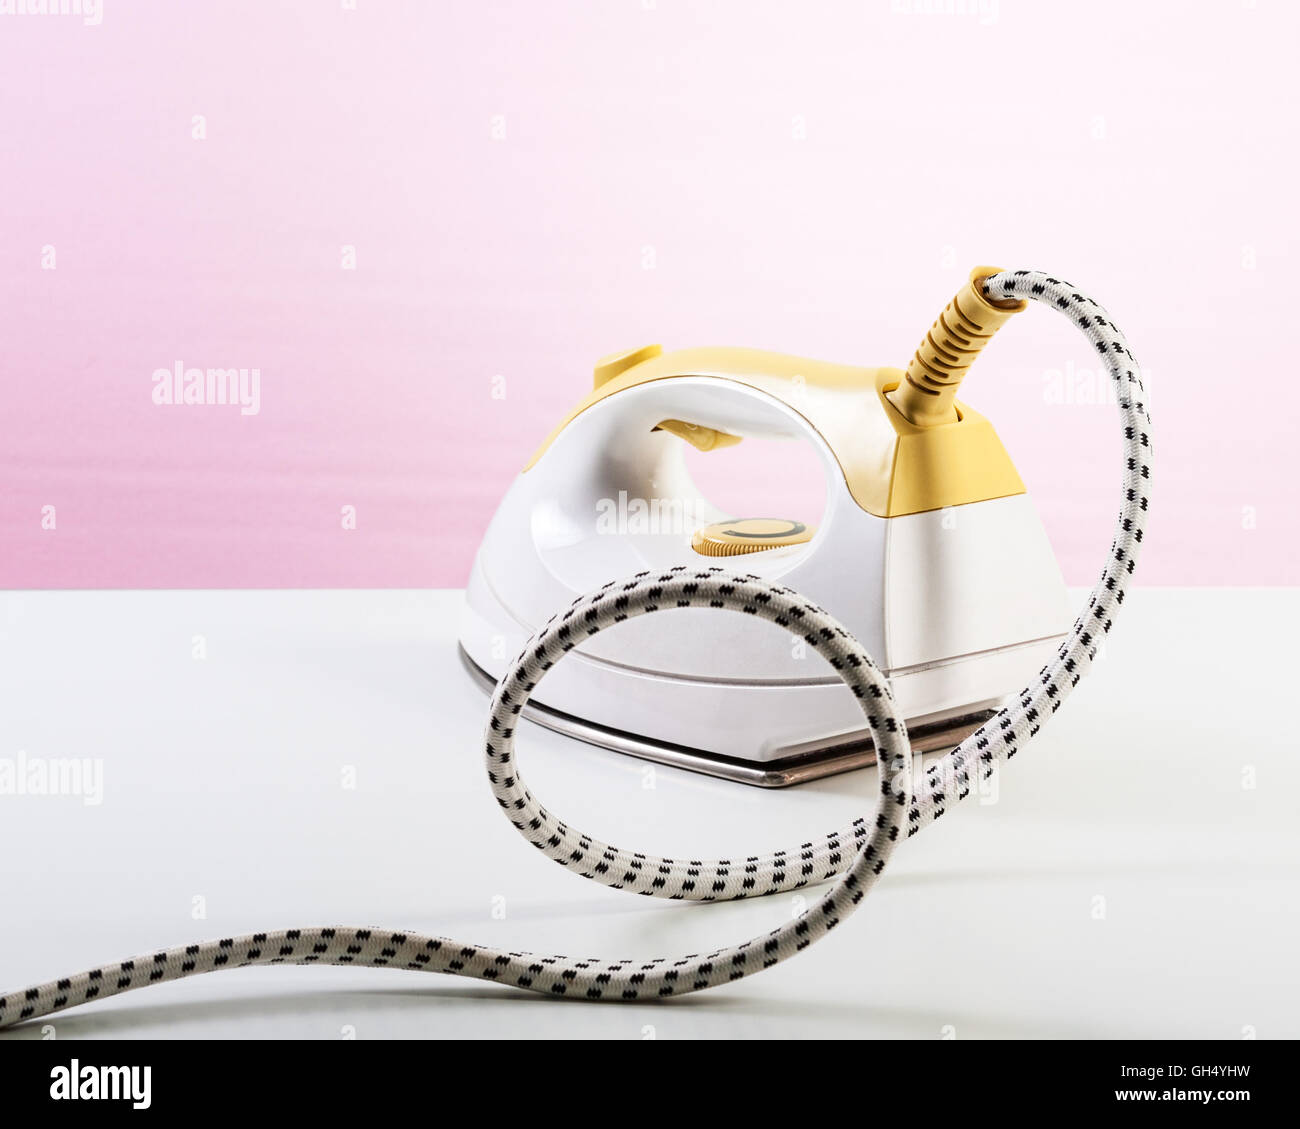 Yellow steam smoothing iron on pink background. Single object with clipping path Stock Photo